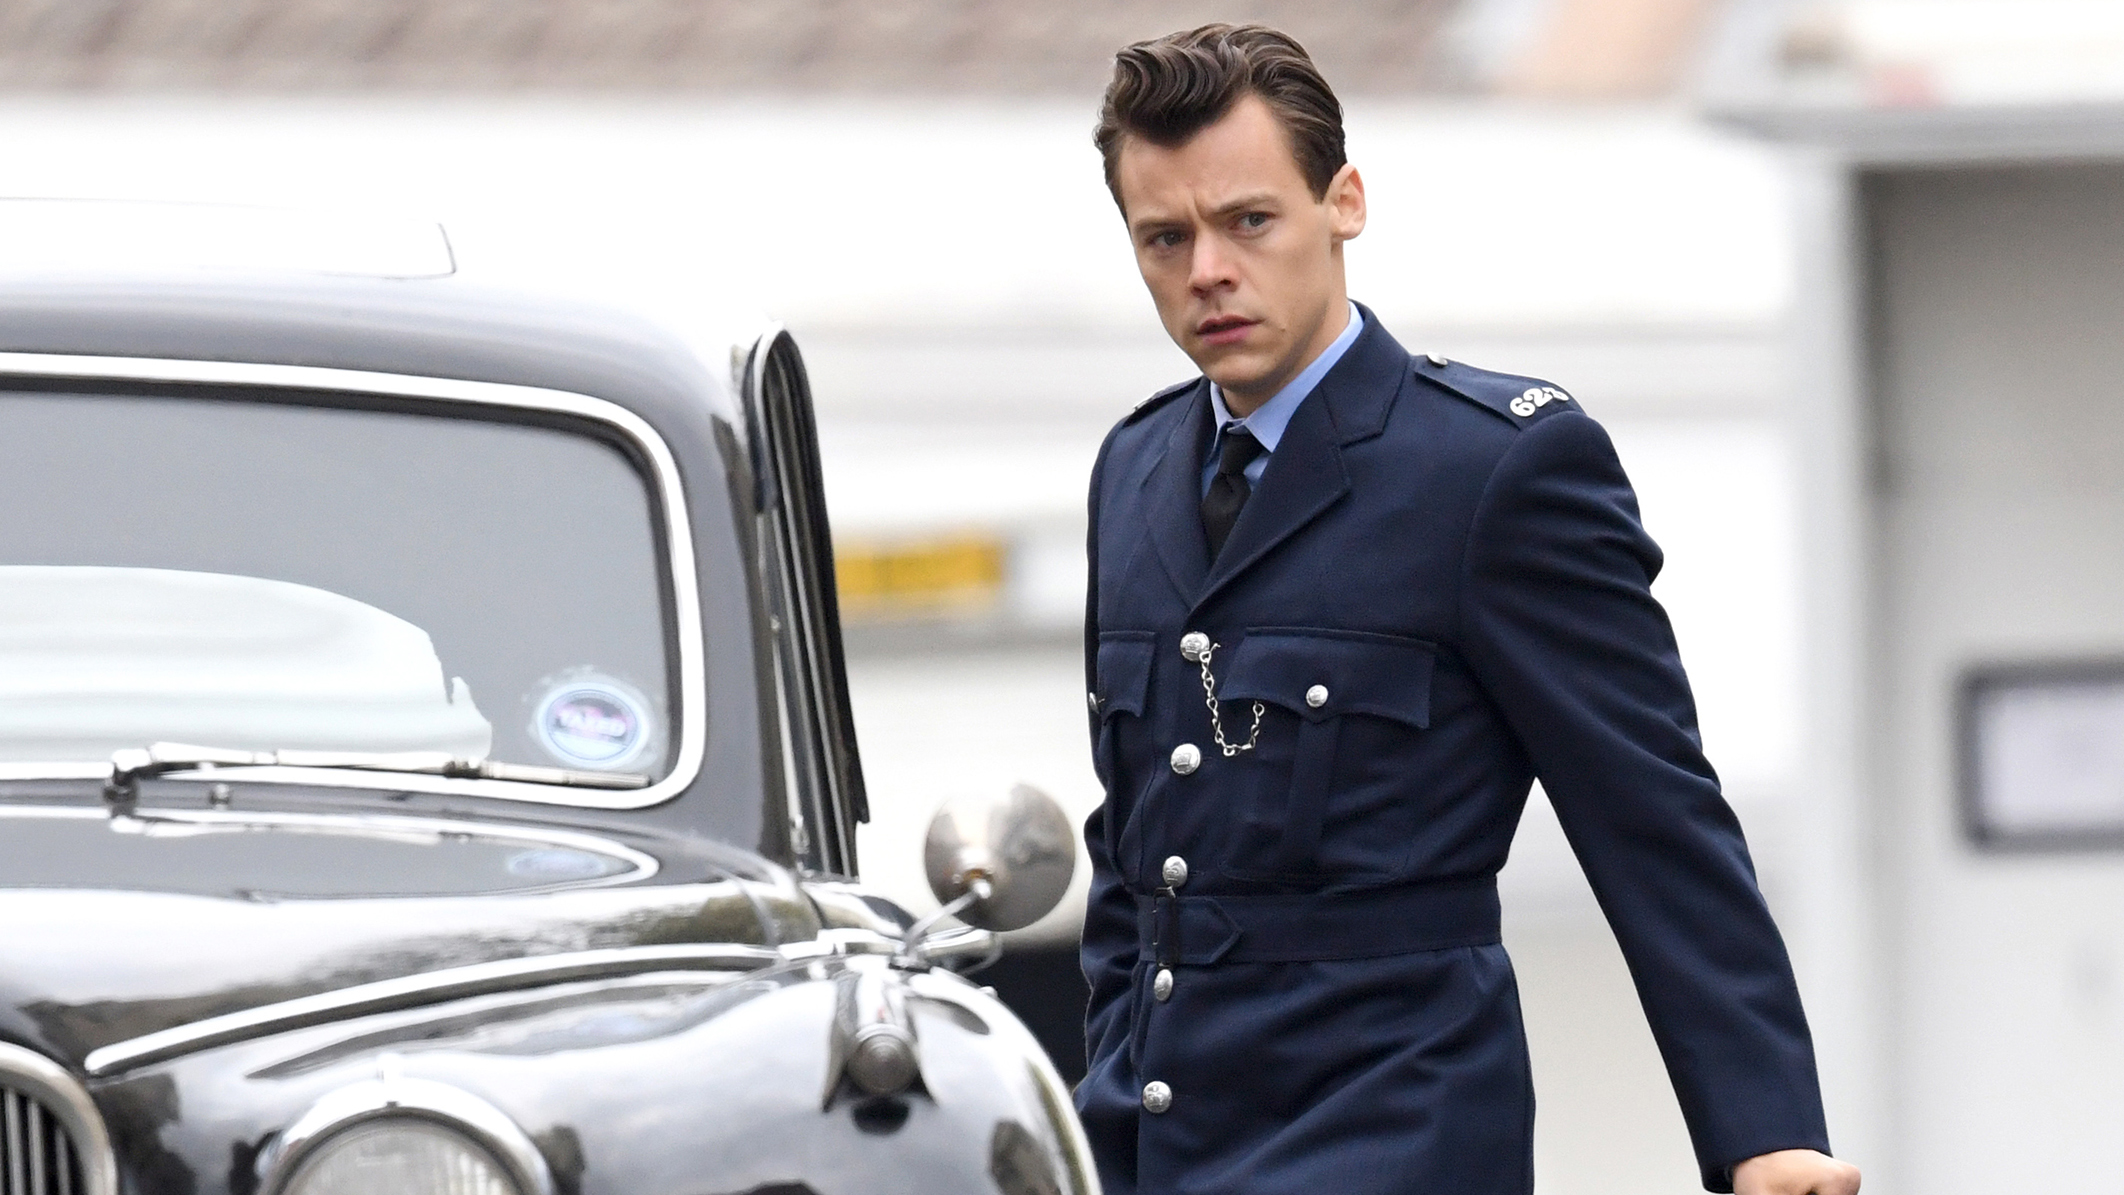 My Policeman Harry Styles, release date, cast, trailer plot What to